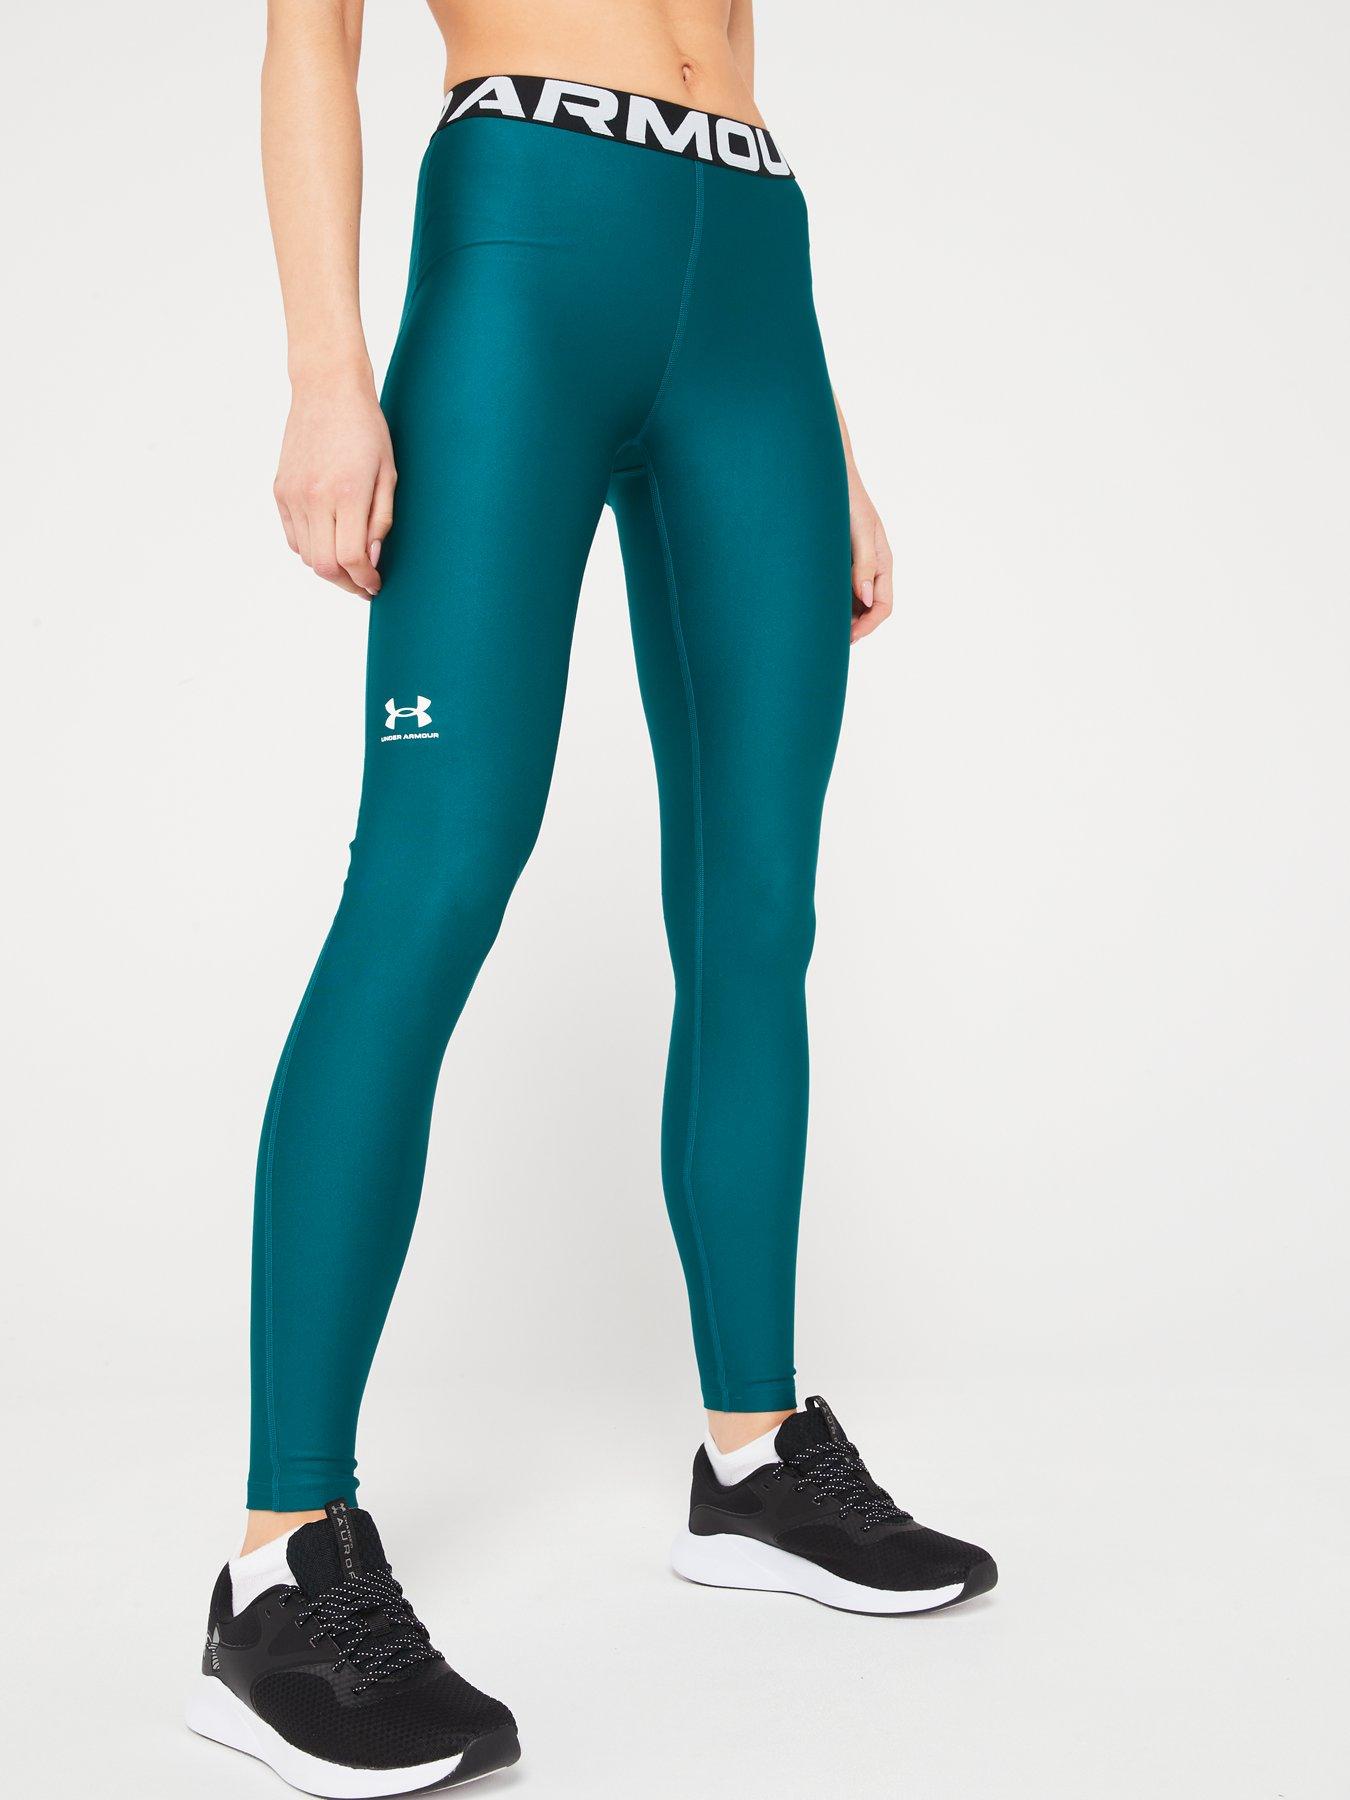 Tight, Tights & leggings, Womens sports clothing, Sports & leisure